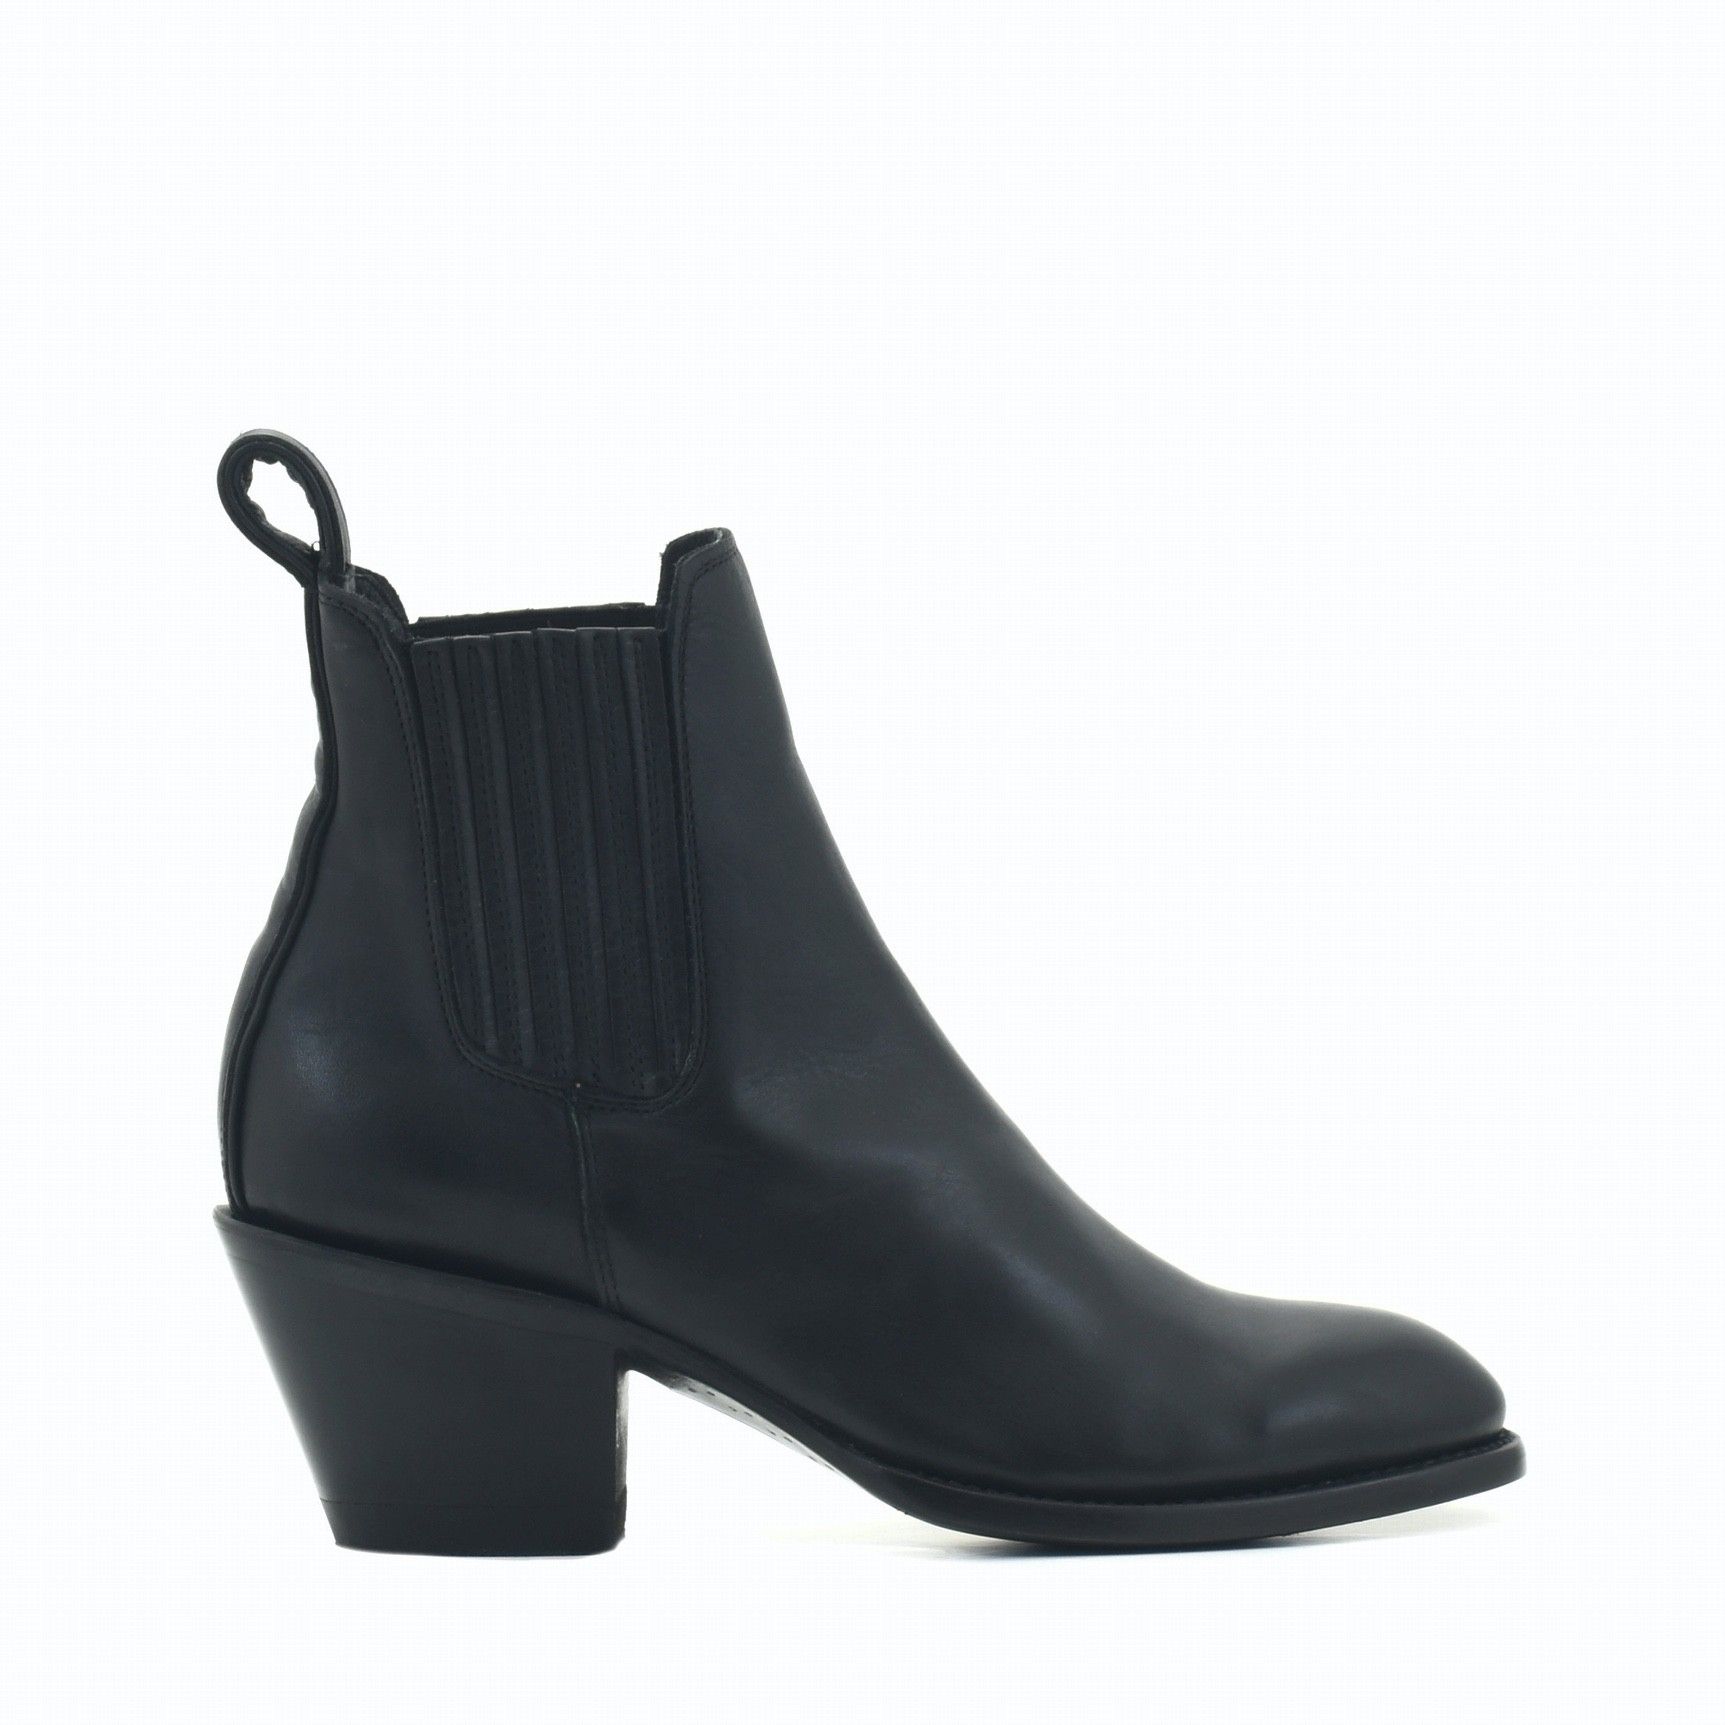 ESTUDIO LONDON BLACK ROUNDED TOE ANKLE BOOTS FEATURING  ELASTICIZED SIDES COVERED WITH LEATHER  Total heel height 2.6 Inches  10